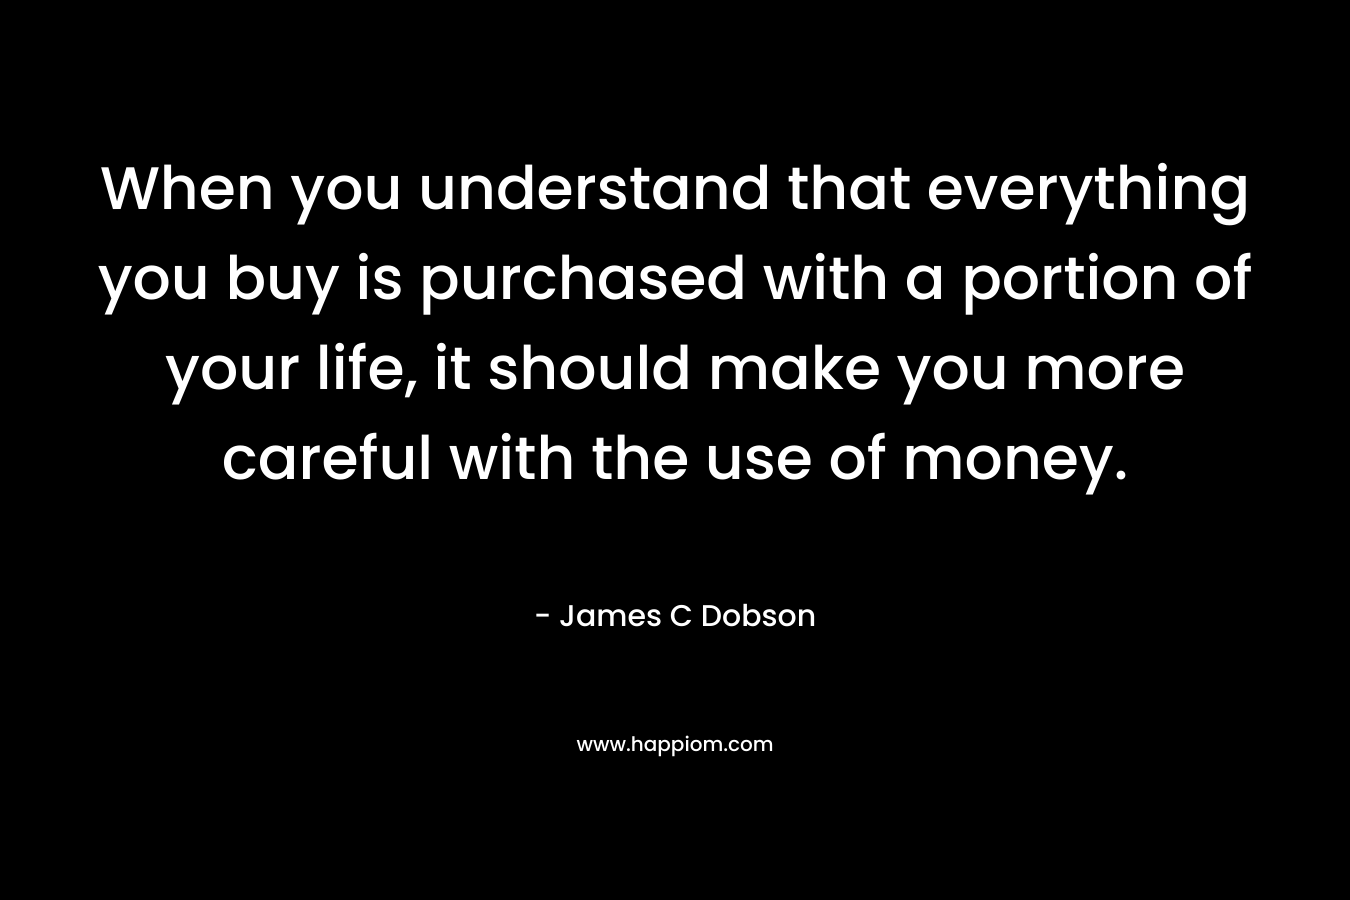 When you understand that everything you buy is purchased with a portion of your life, it should make you more careful with the use of money. – James C Dobson